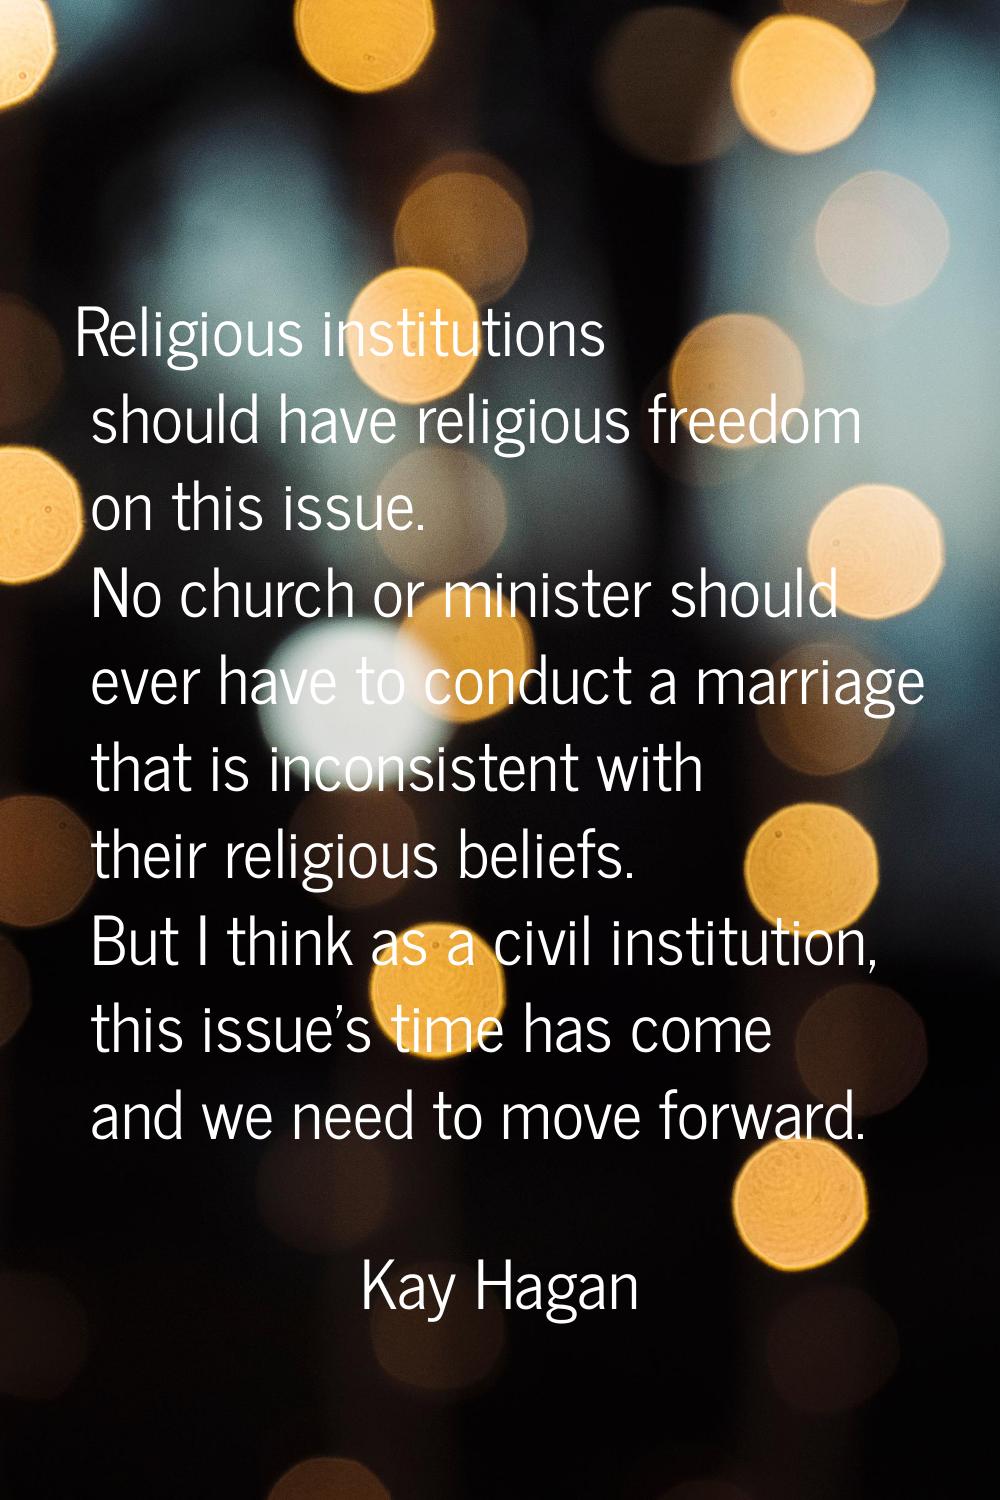 Religious institutions should have religious freedom on this issue. No church or minister should ev